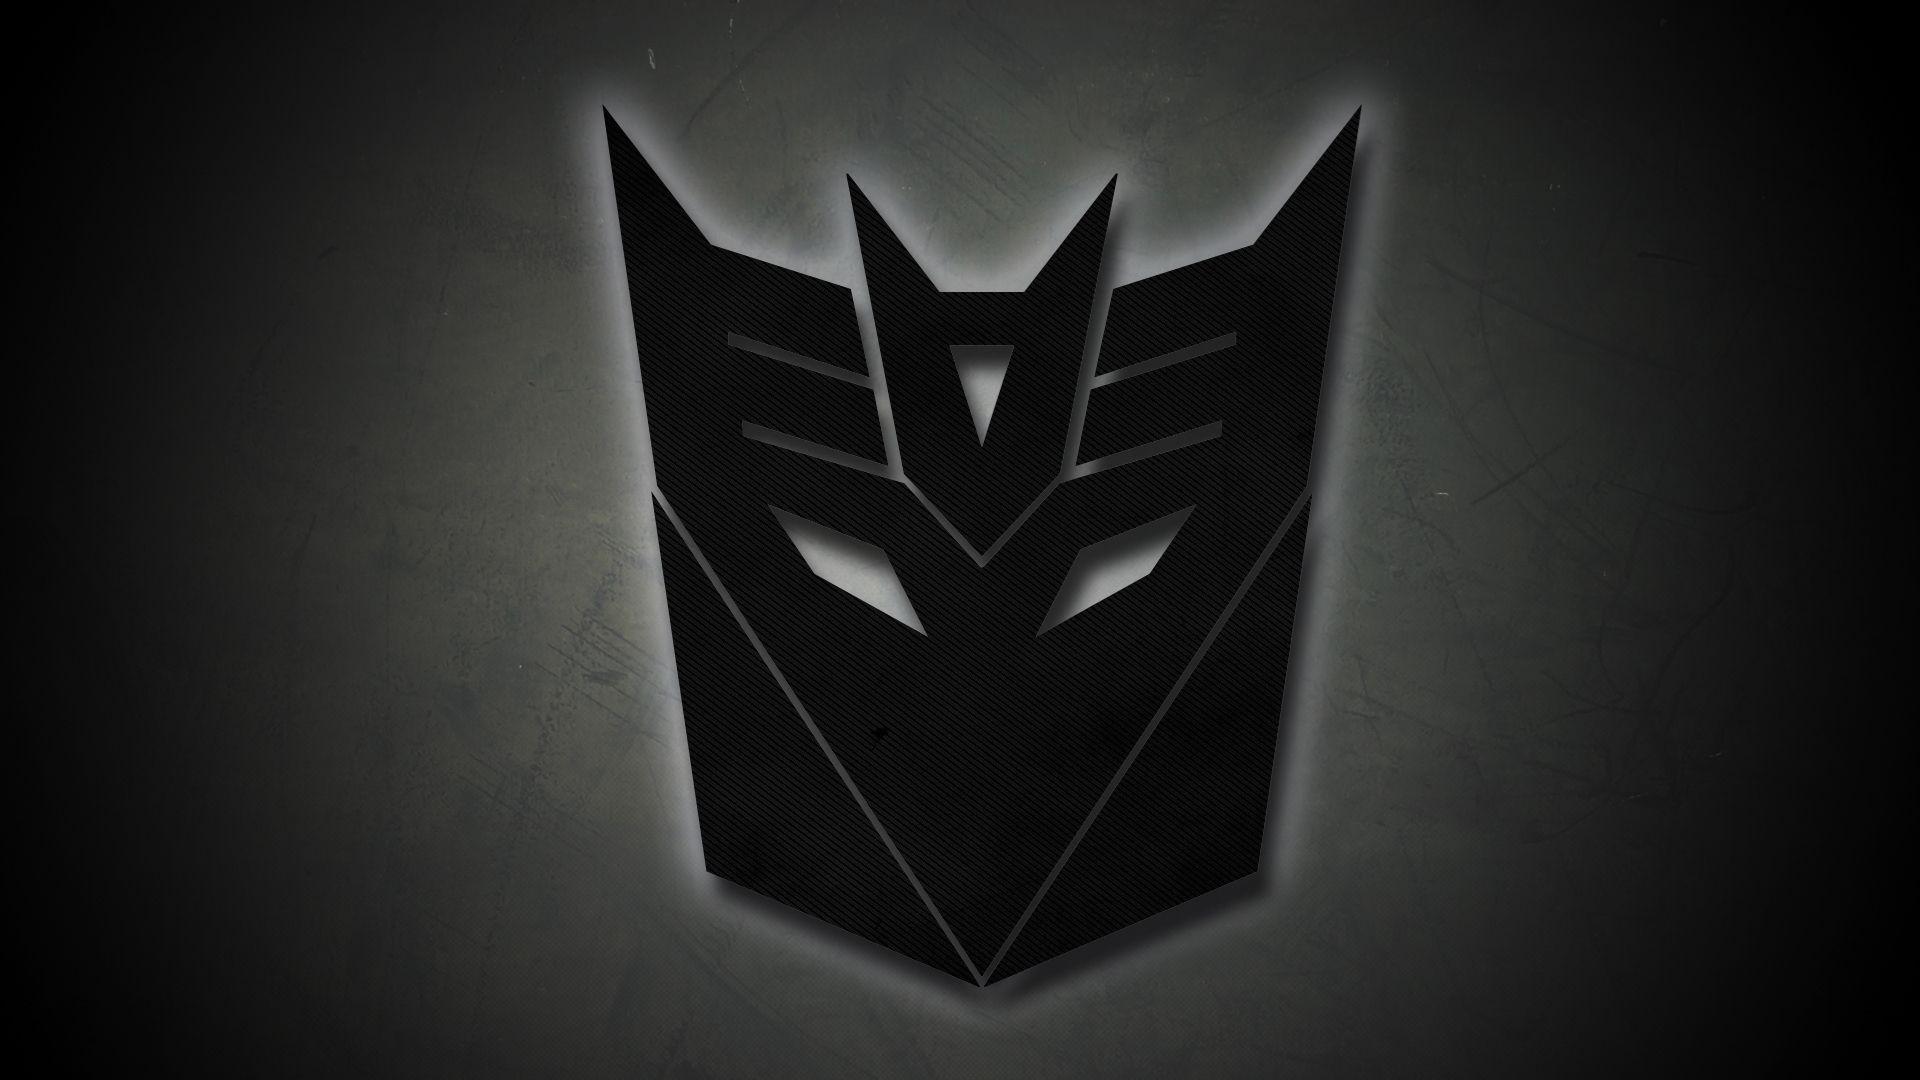 Wallpaper.wiki Decepticons Background Full HD PIC WPB008286